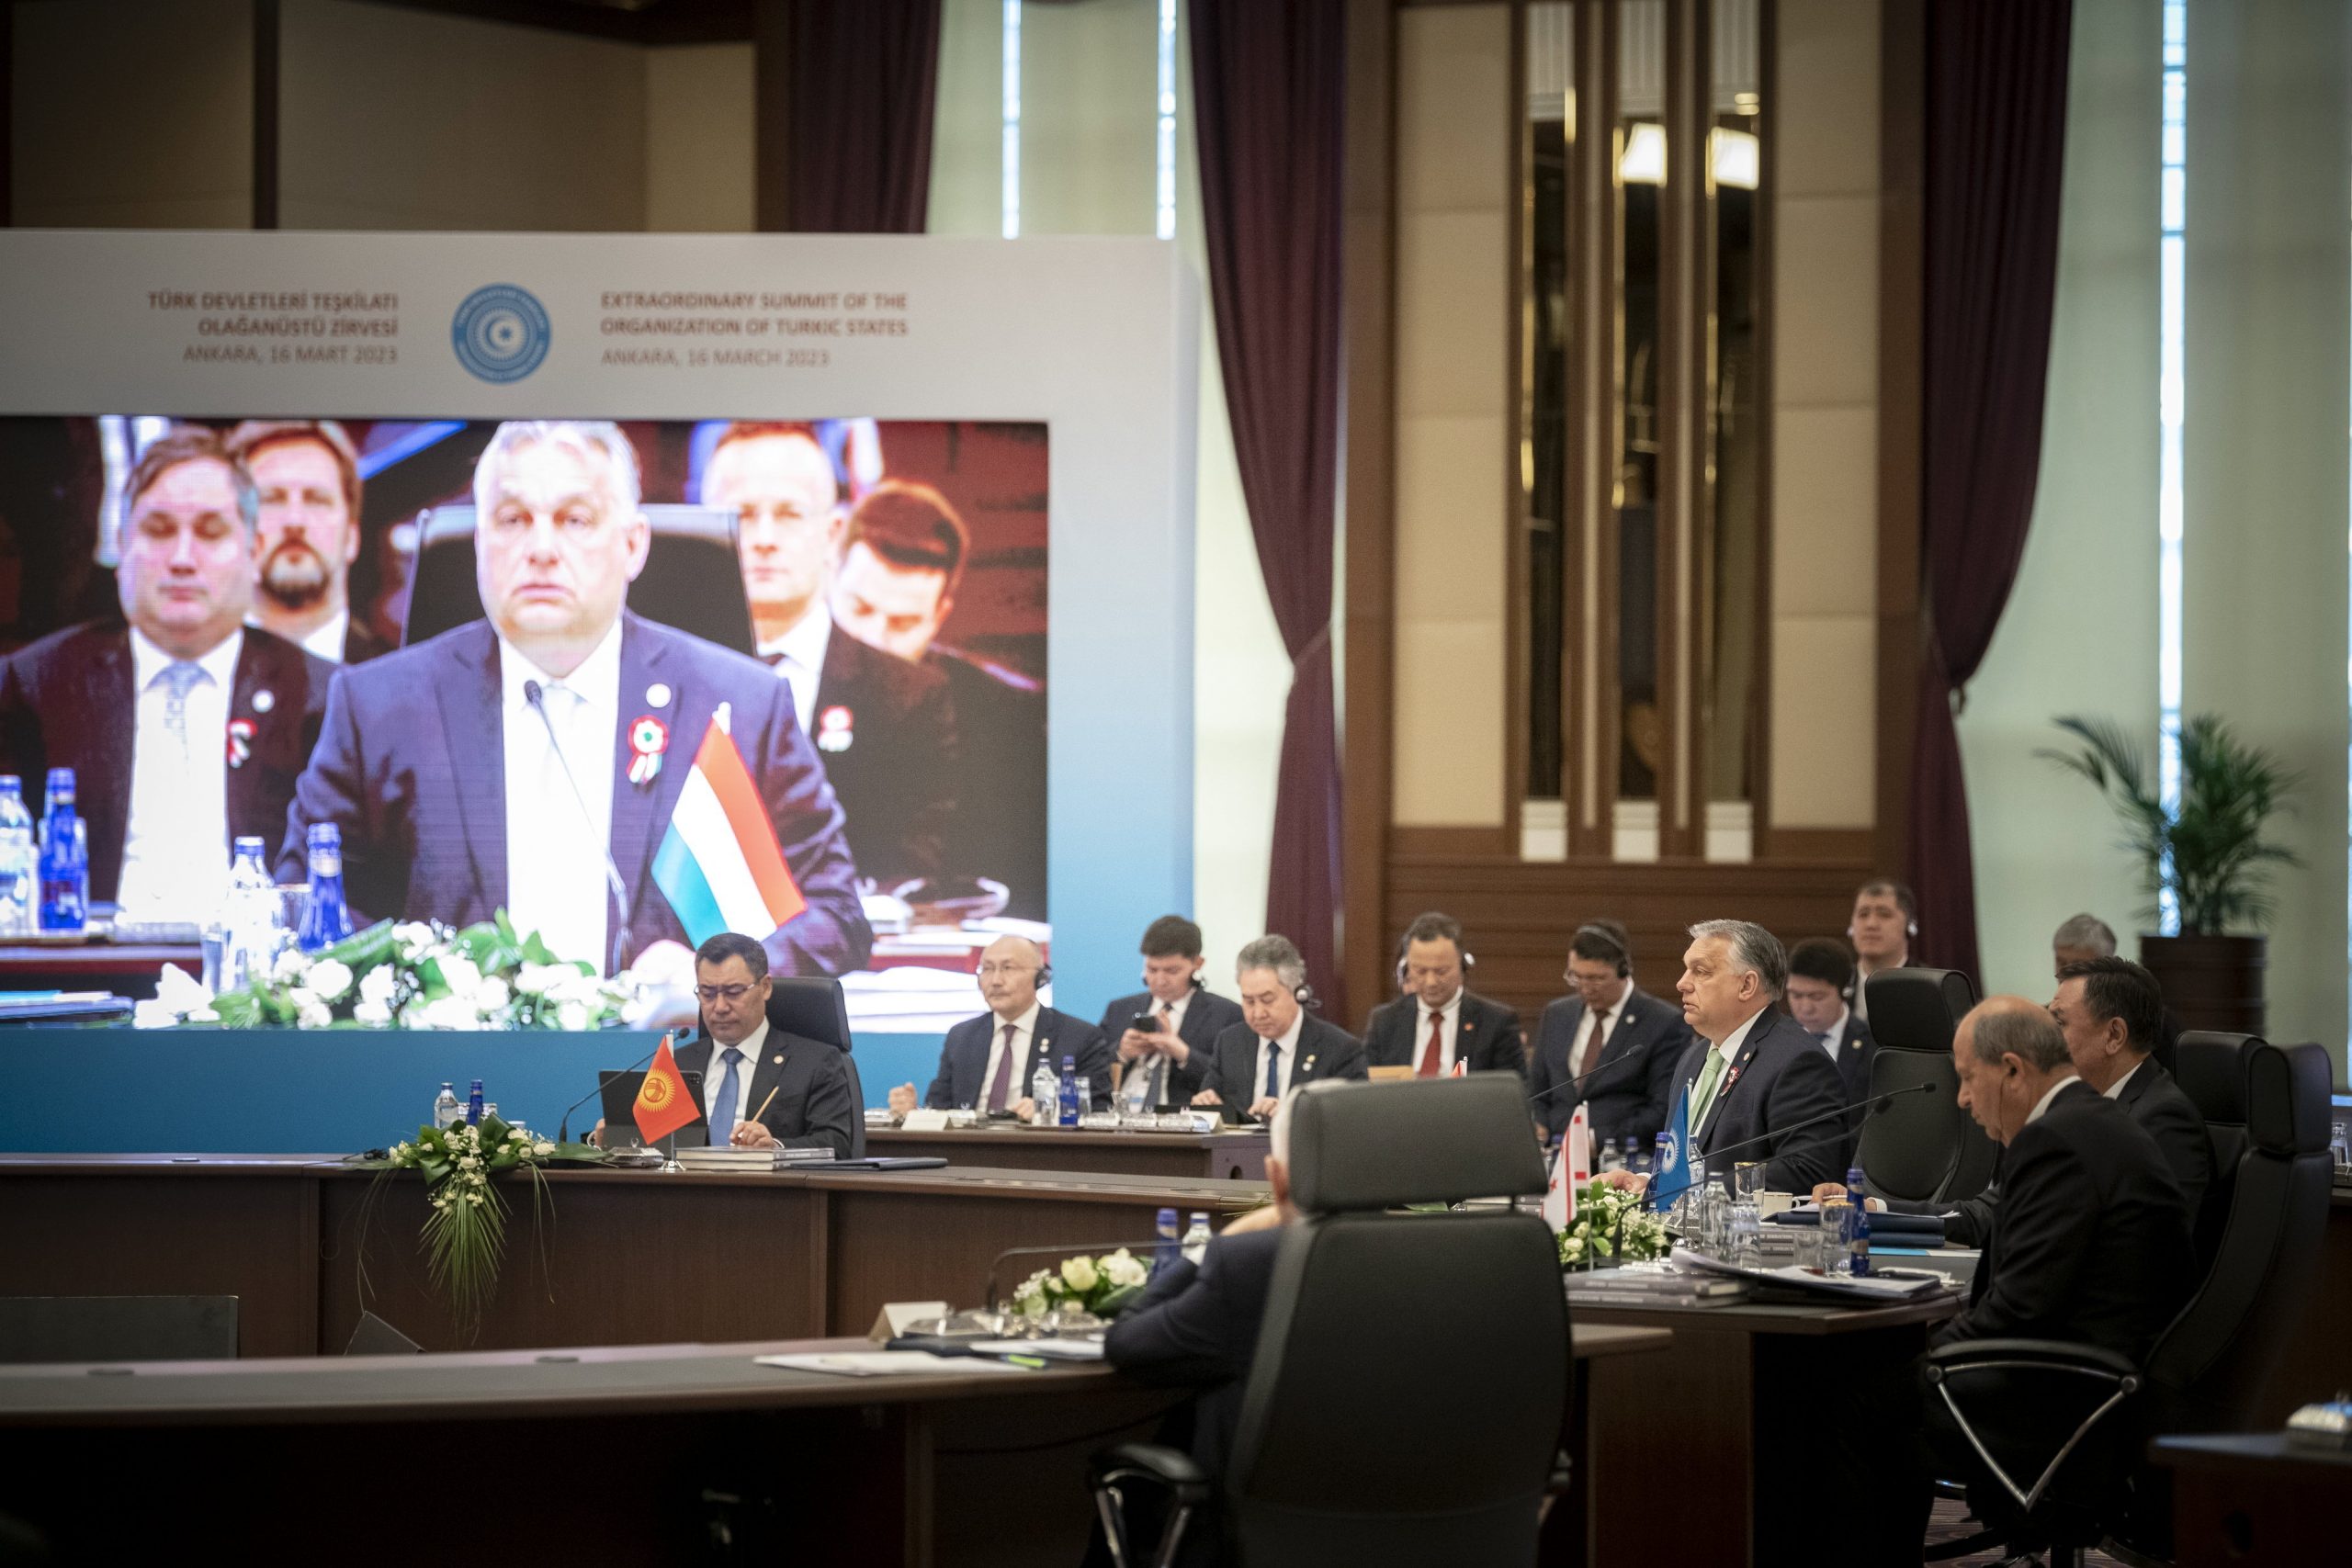 Prime Minister Viktor Orbán Attends Summit of Organization of Turkic States